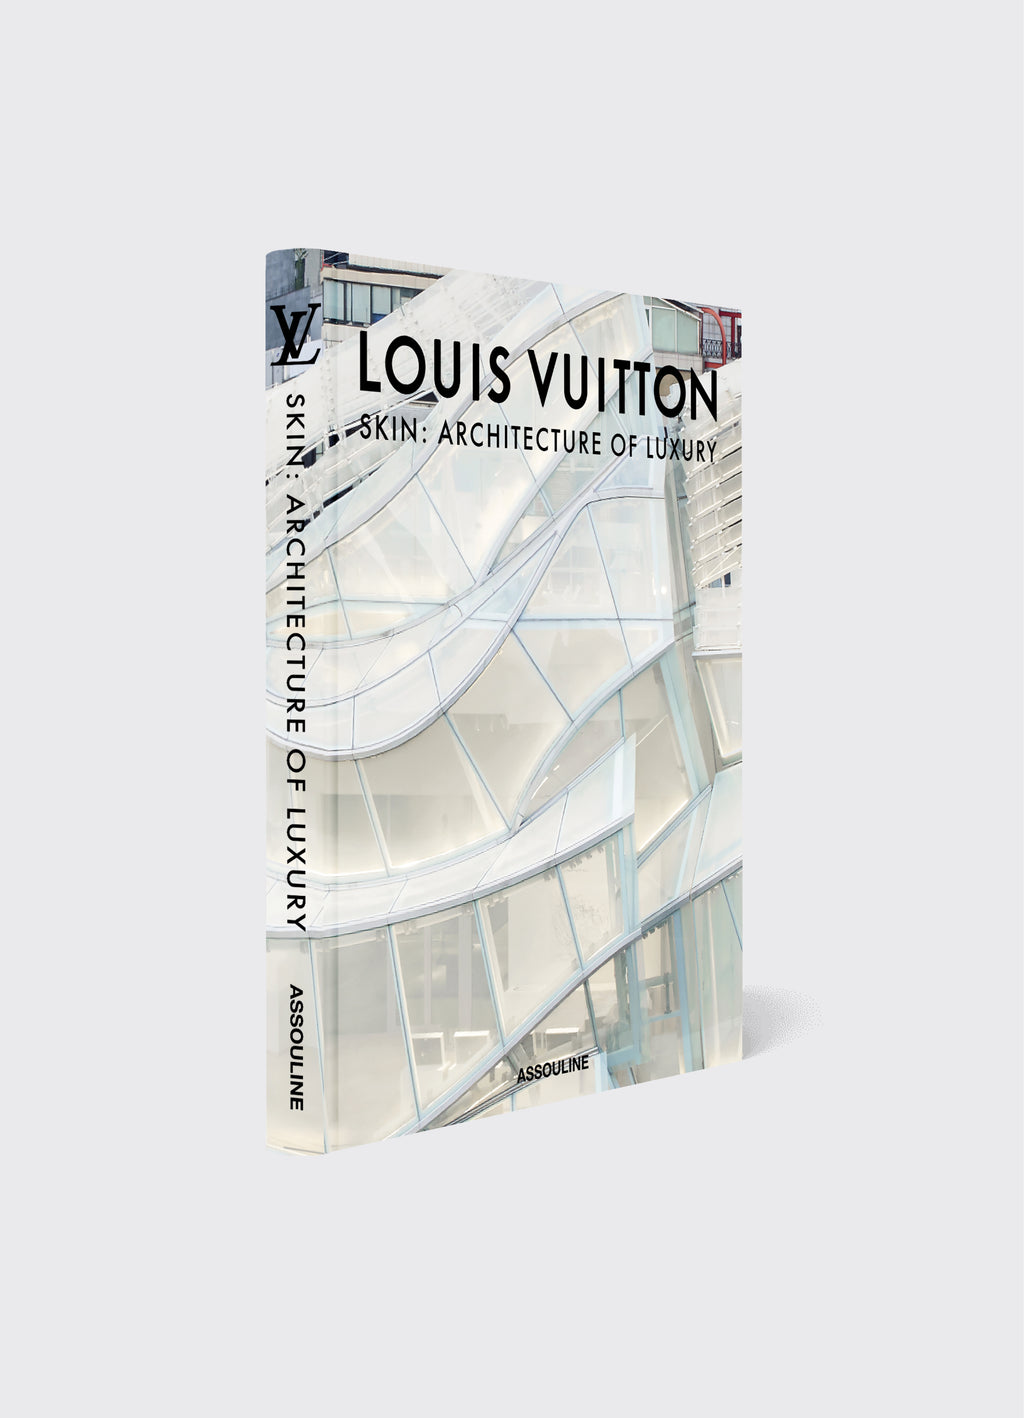 New Louis Vuitton 'Skin' Book Explores the Maison's Architectural Expertise